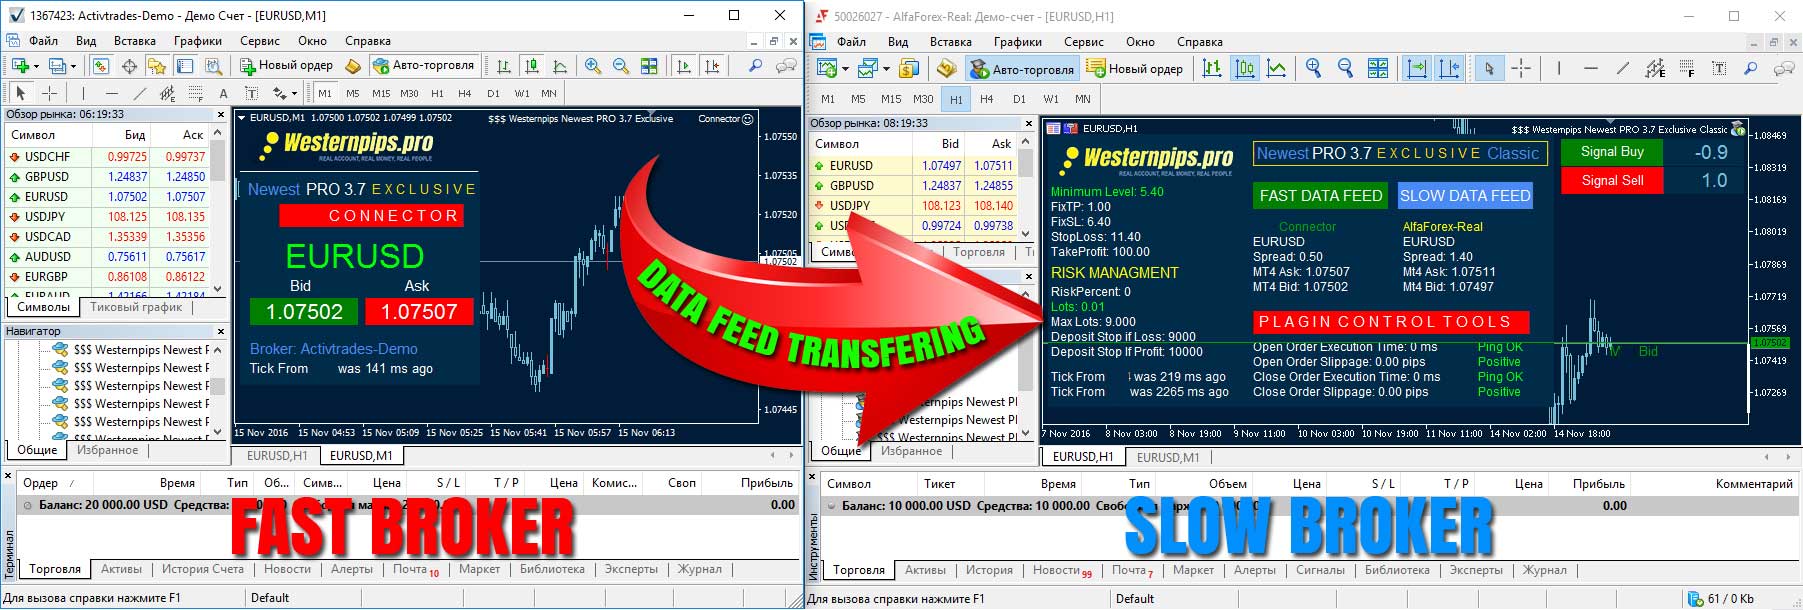 high frequency trading software